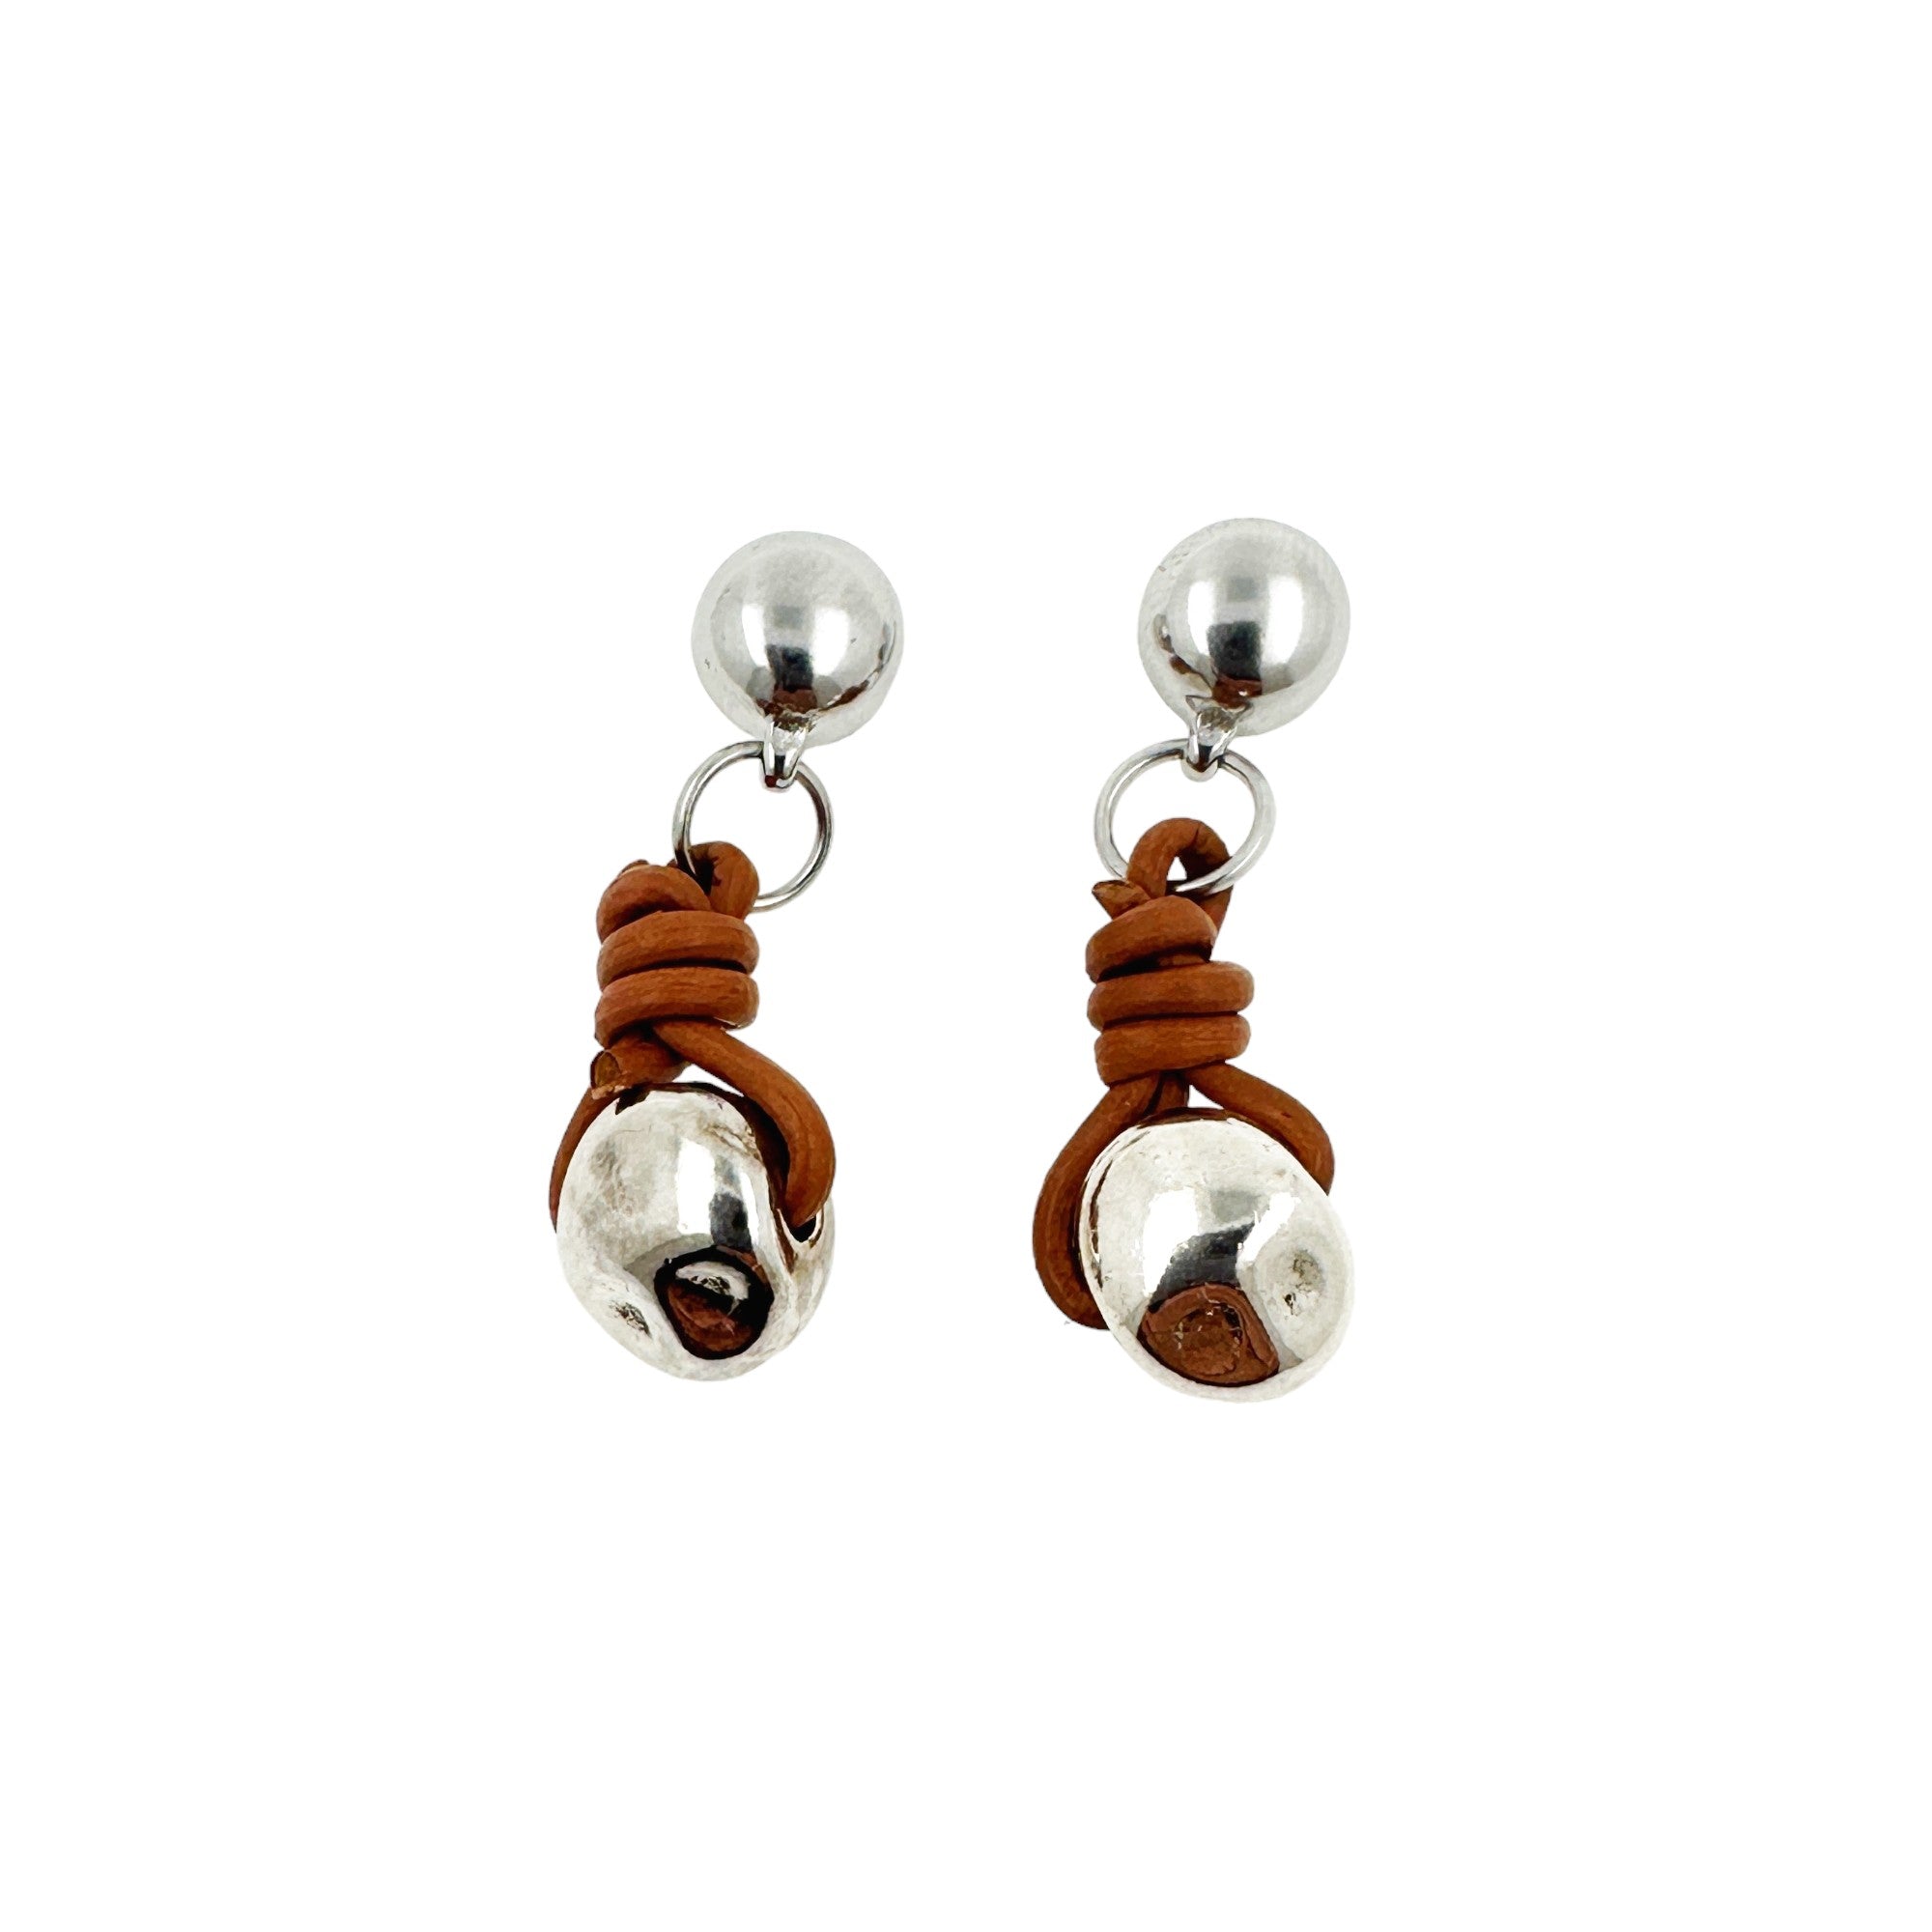 Ti-Go tied silver nugget earrings